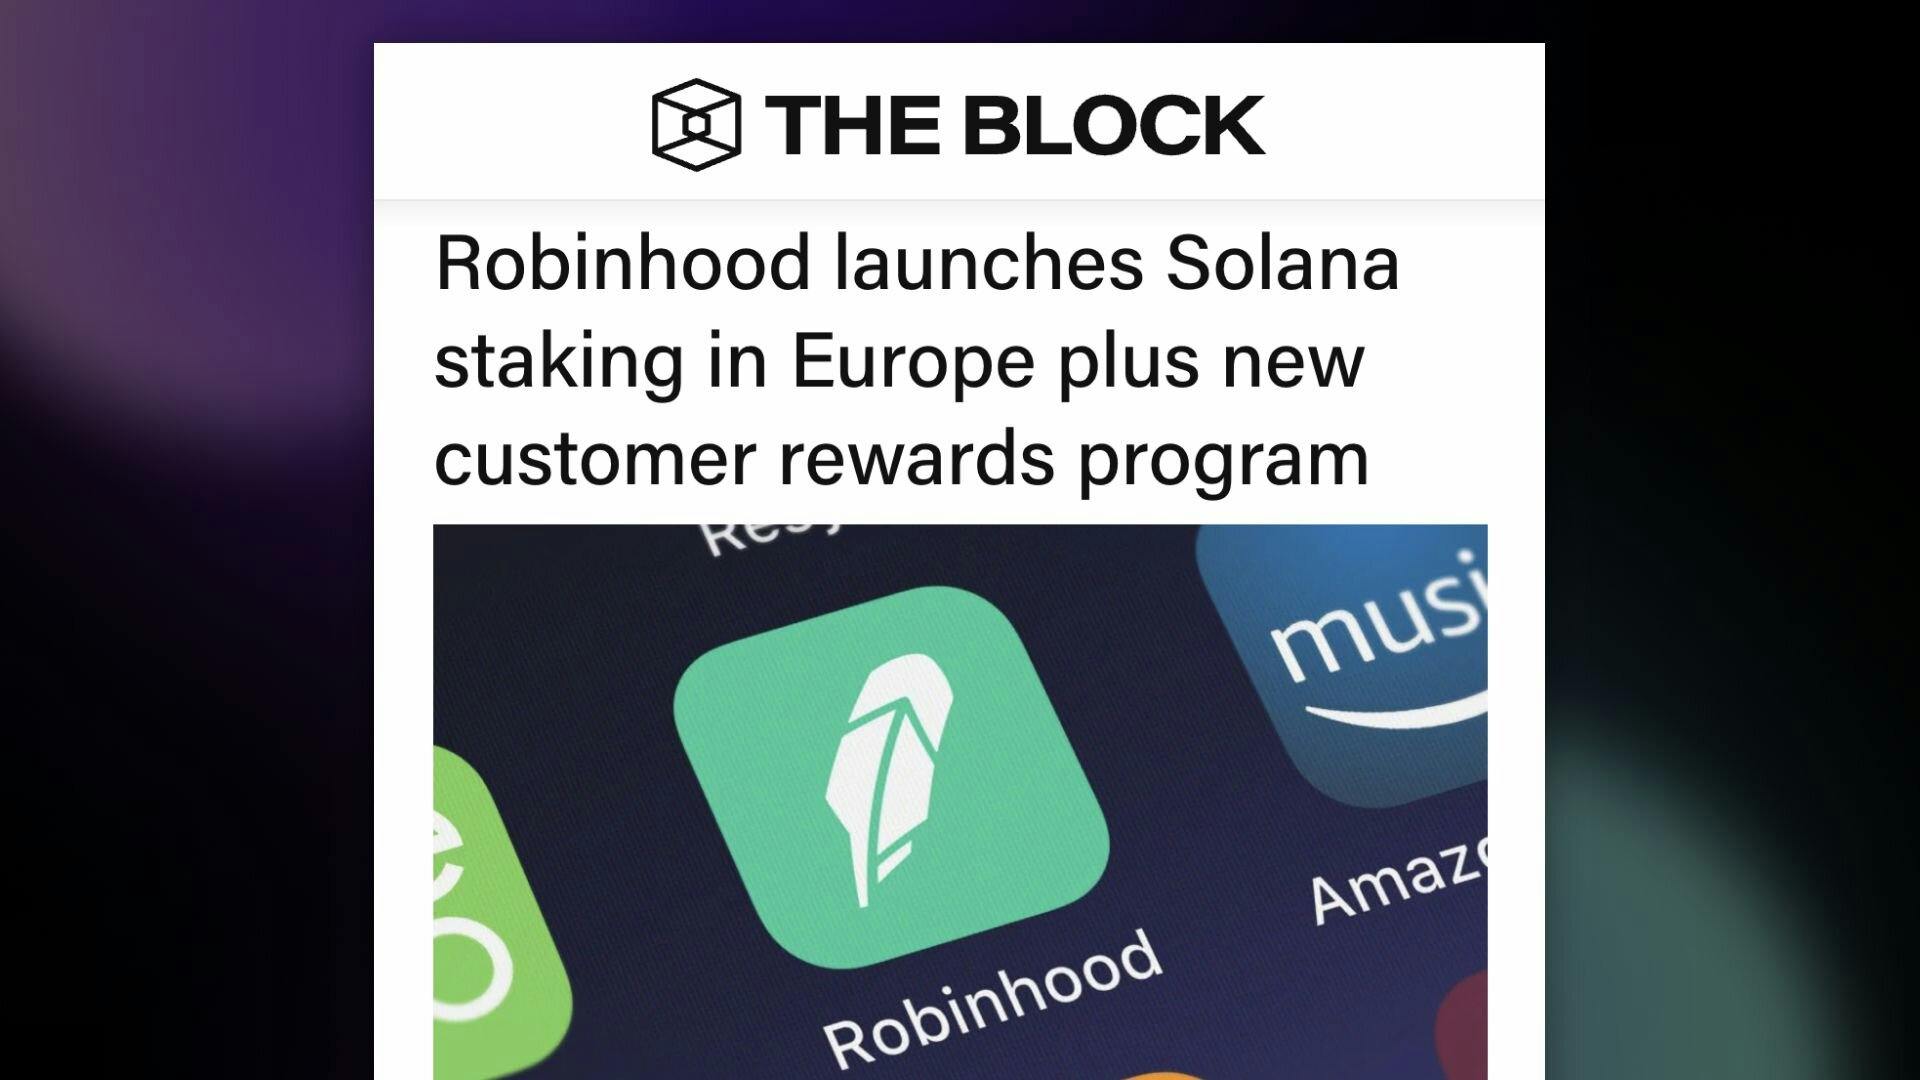 A headline from the Block: Robinhood launches Solana staking in Europe plus new customer rewards program